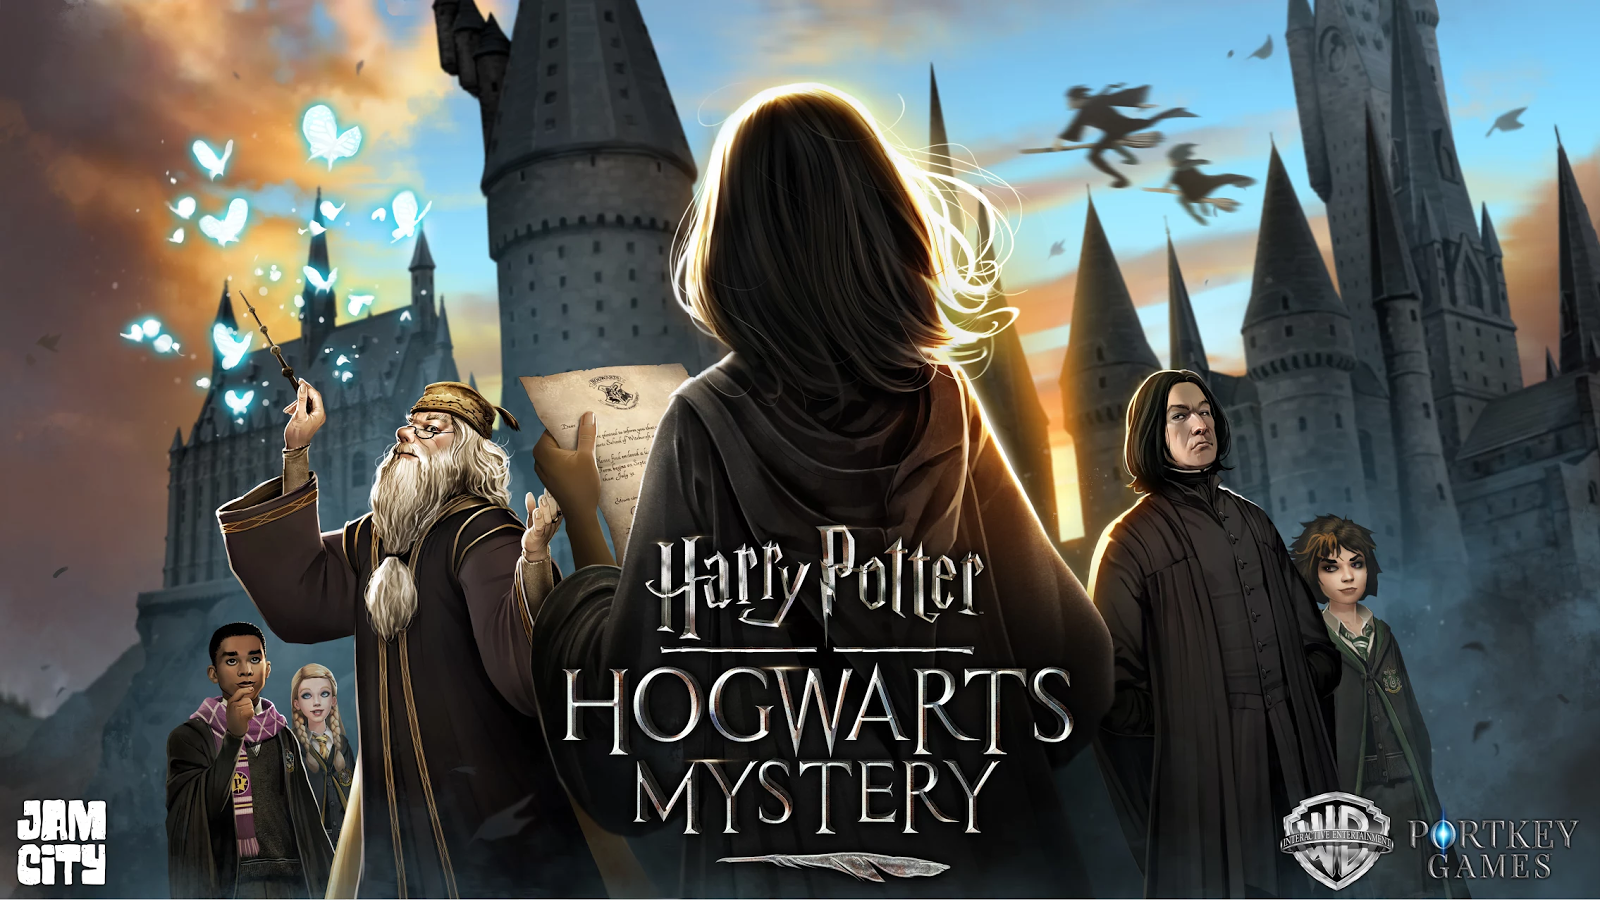 Harry potter hogwarts mystery respostas das perguntas 1 ano Harry Potter Hogwarts Mystery Friendship Answers Best Choices For Rowan Ben Copper And Other Character Side Quests